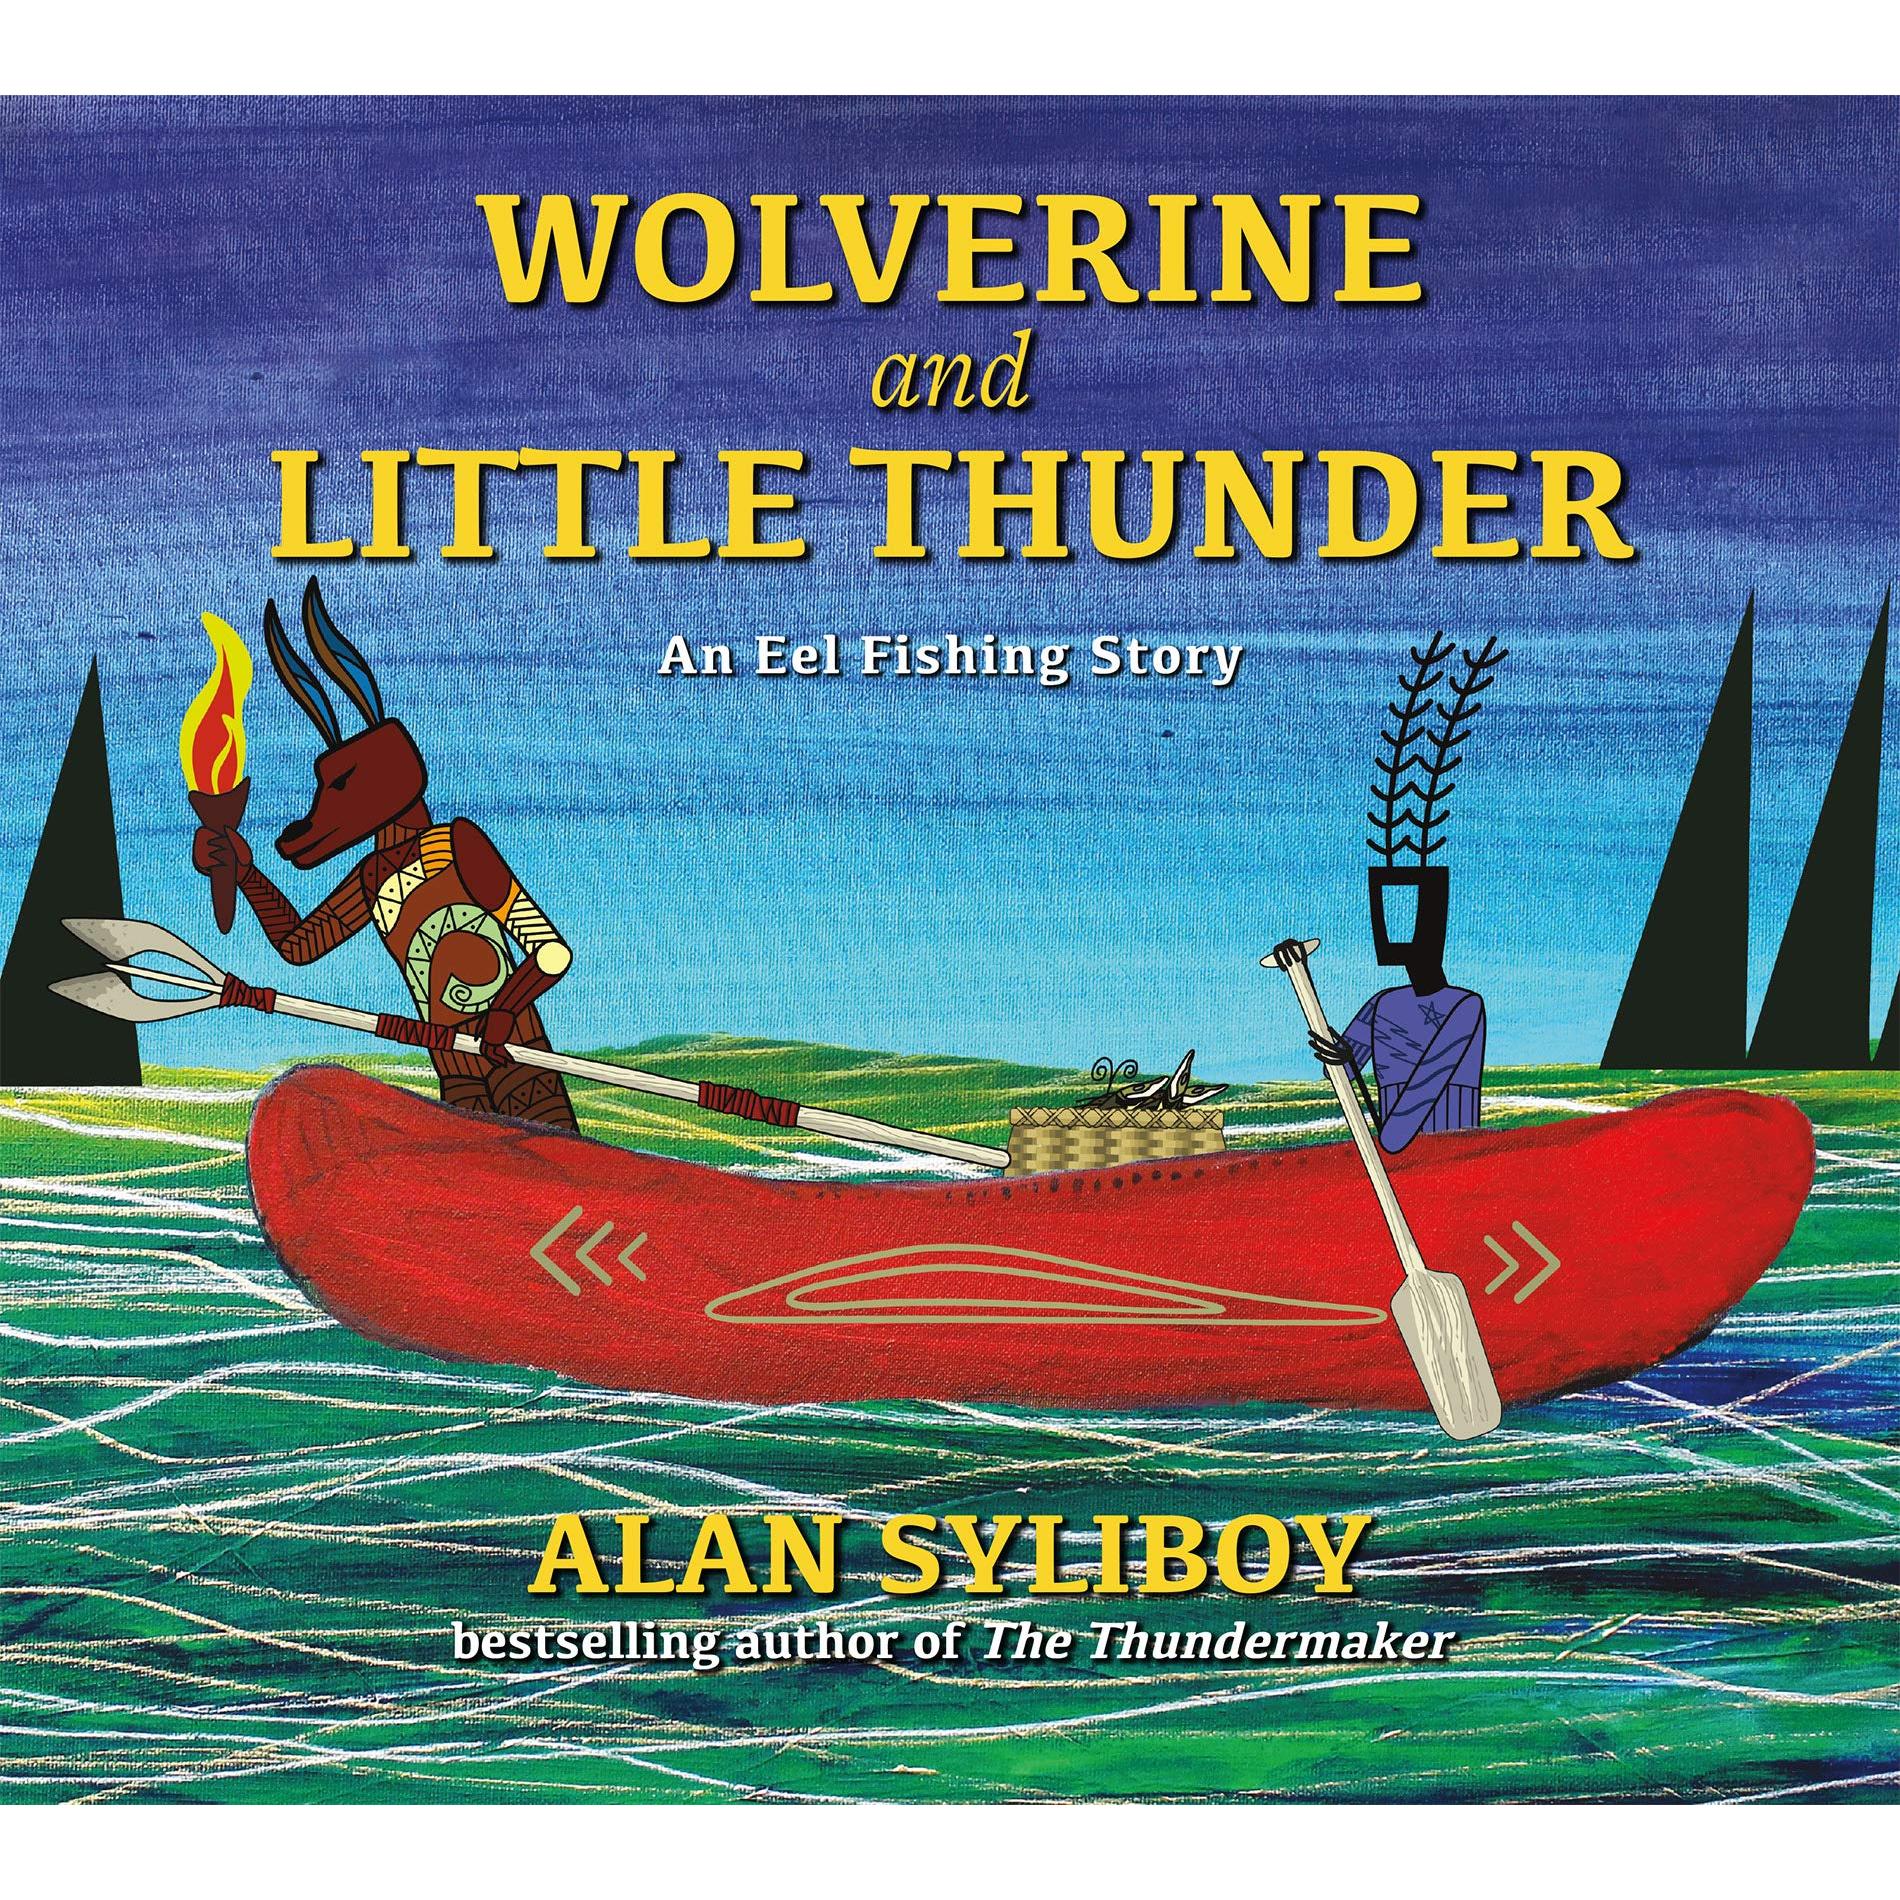 Wolverine and Little Thunder: An Eel Fishing Story